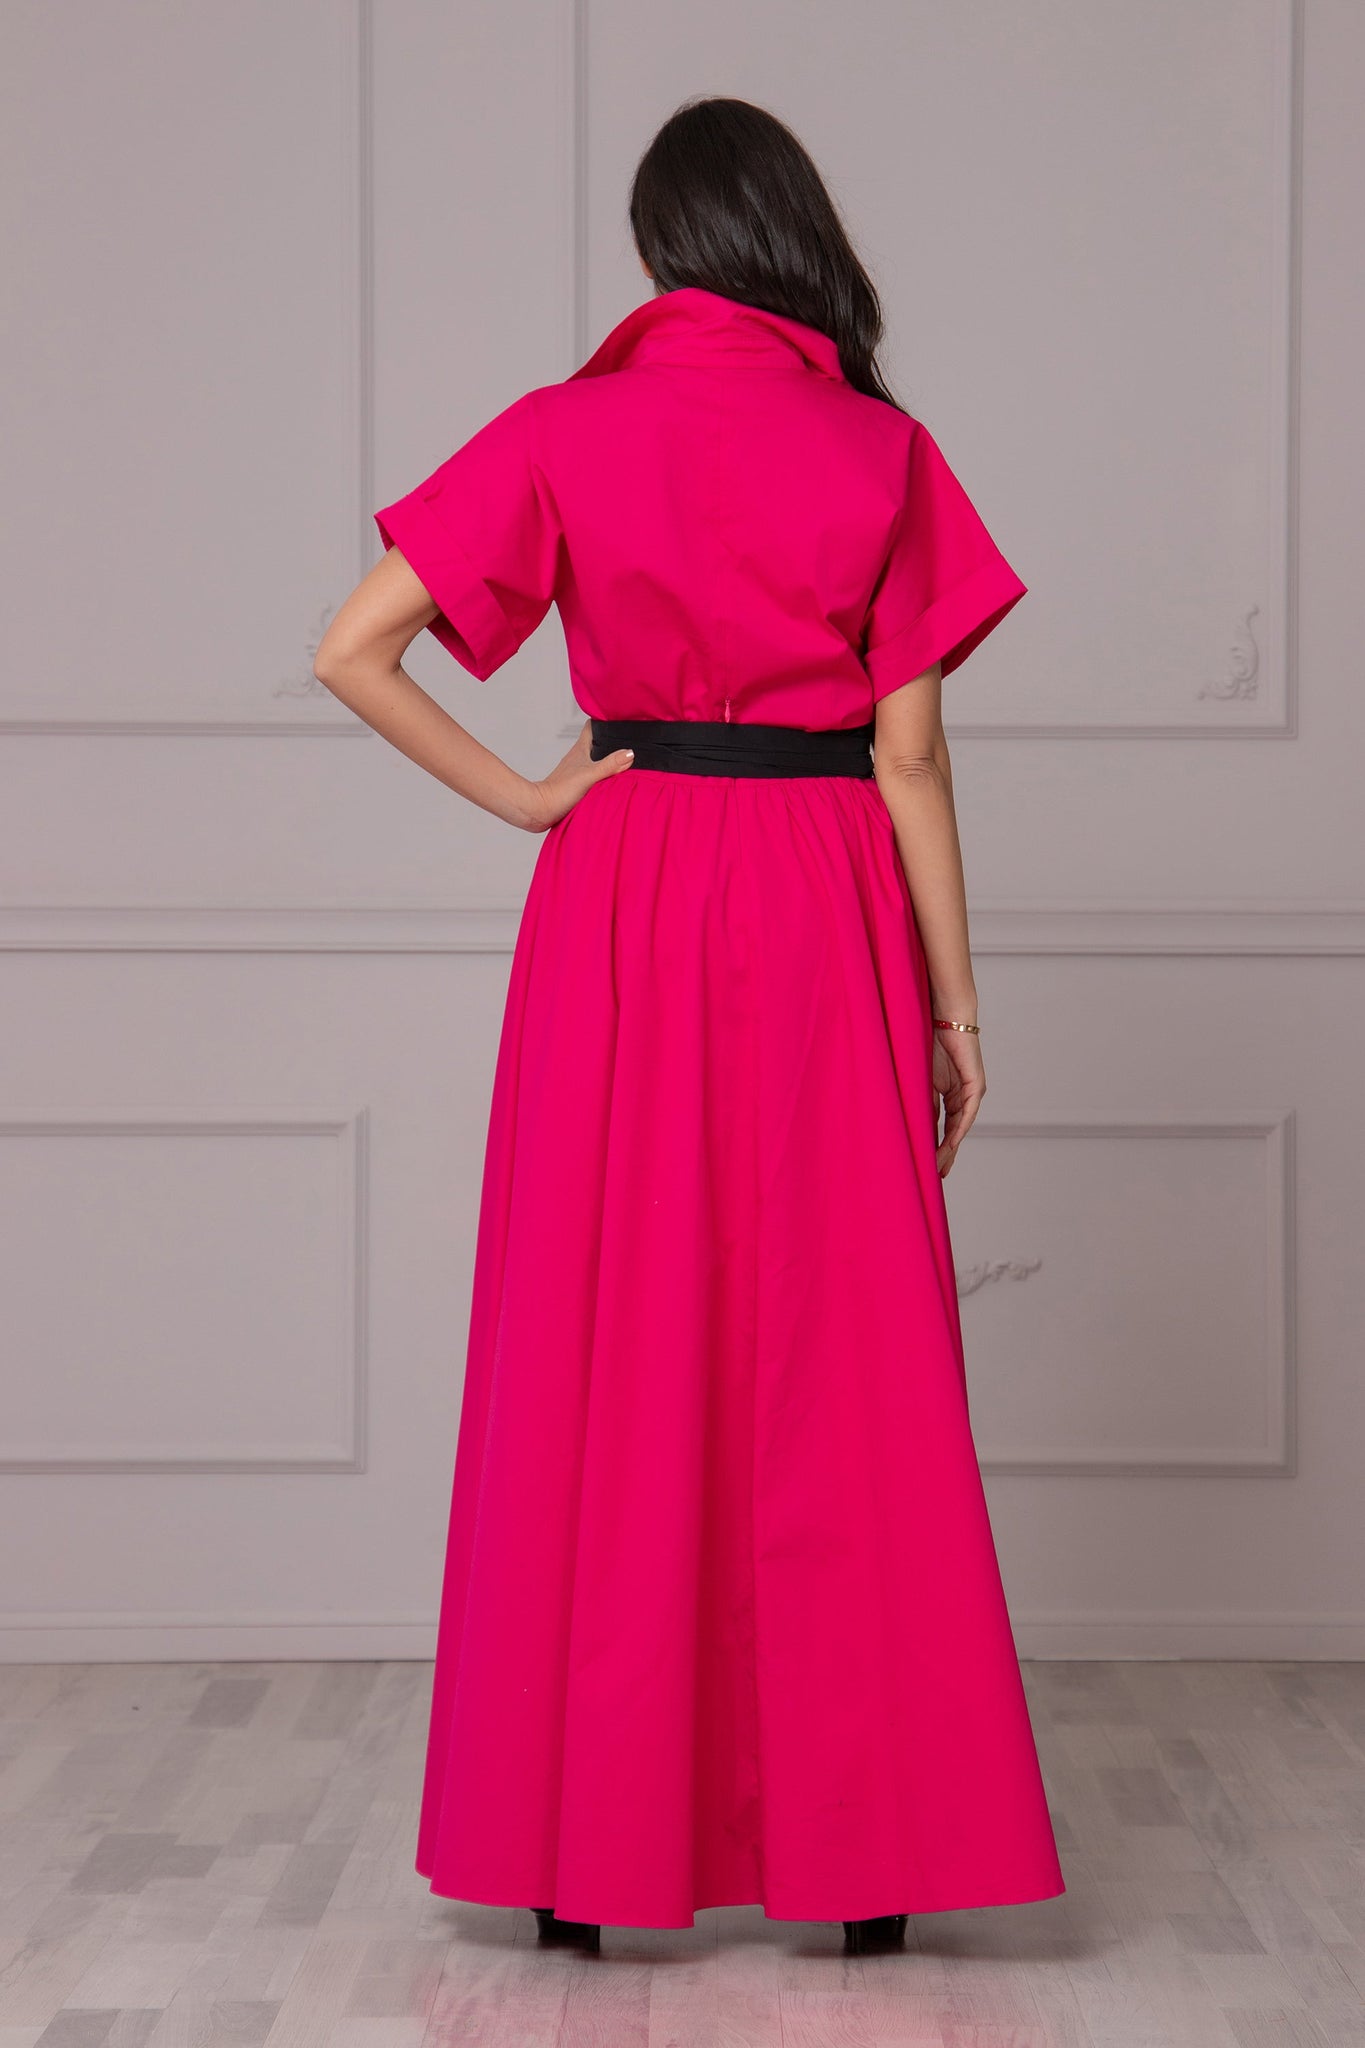 Belted Bright Pink Dress - Astraea